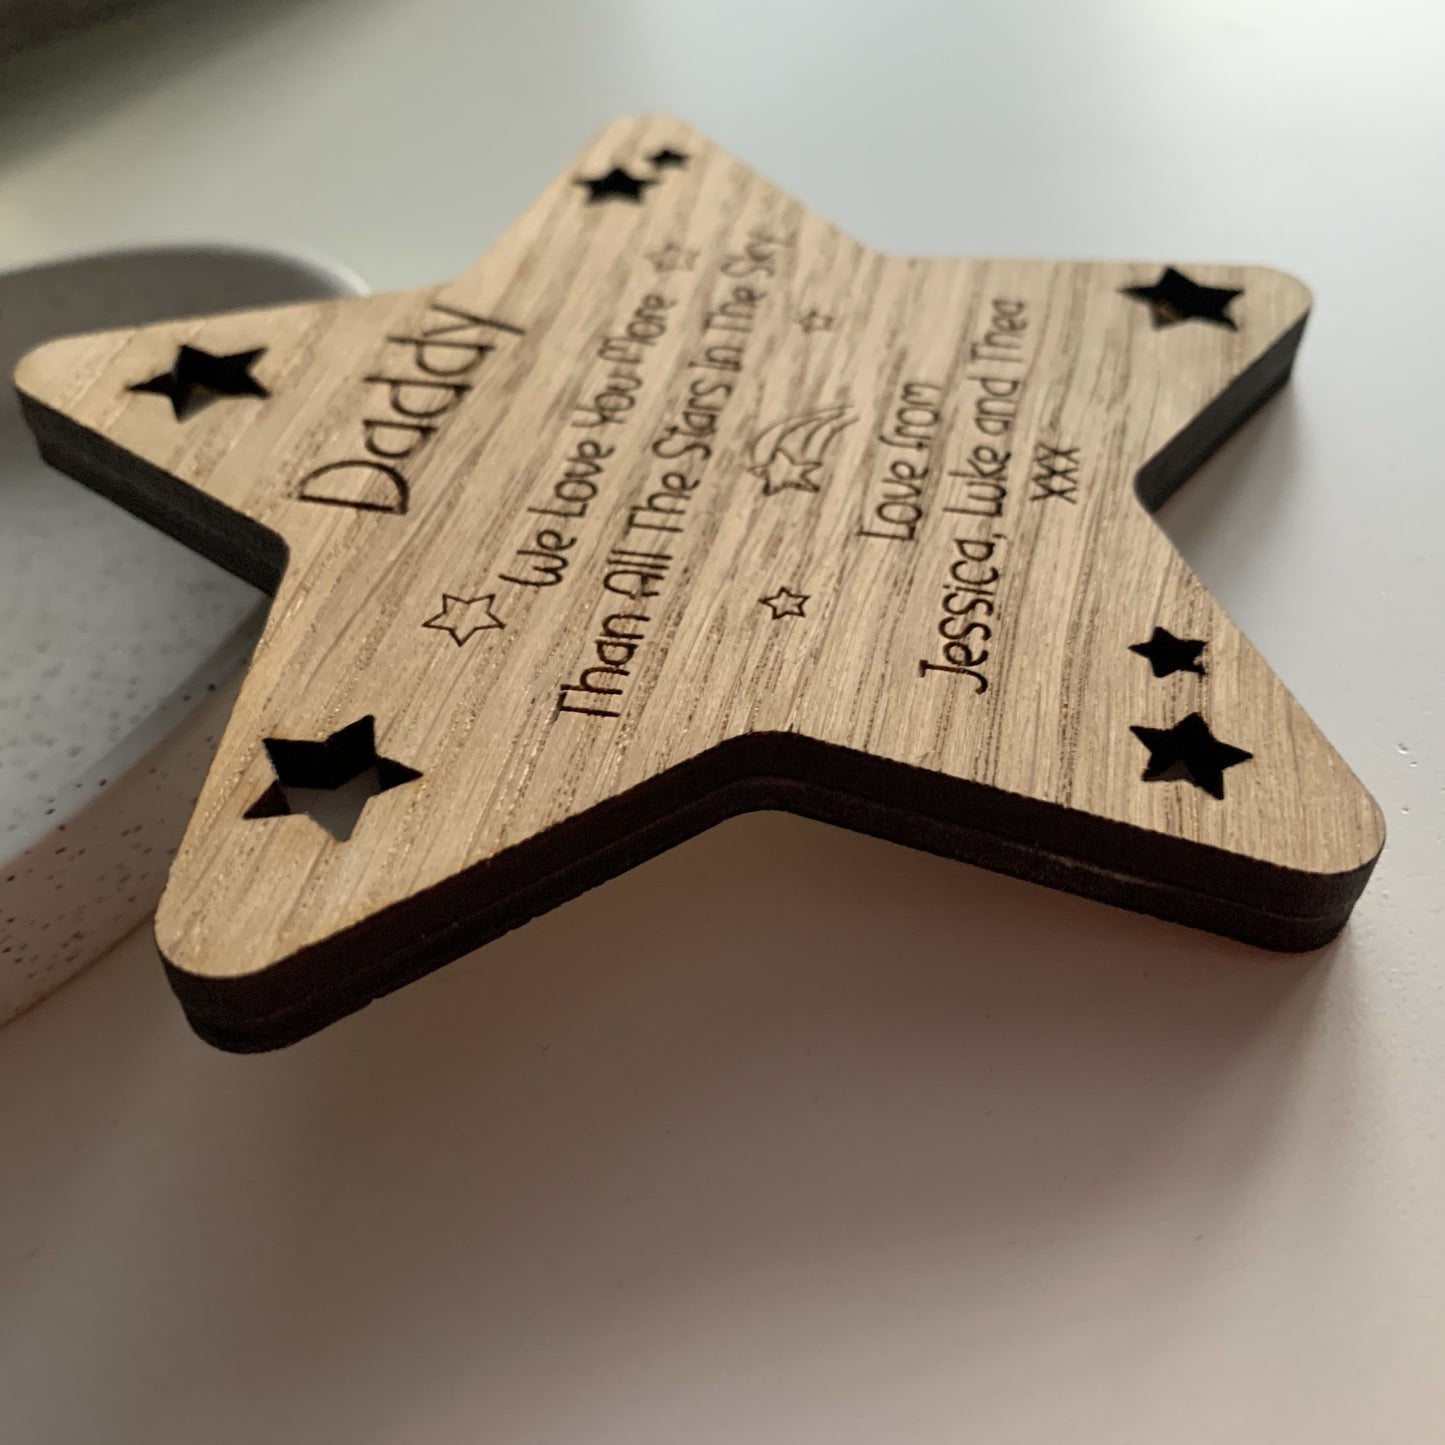 Personalised 'More Than All The Stars In The Sky' Mini Plaque